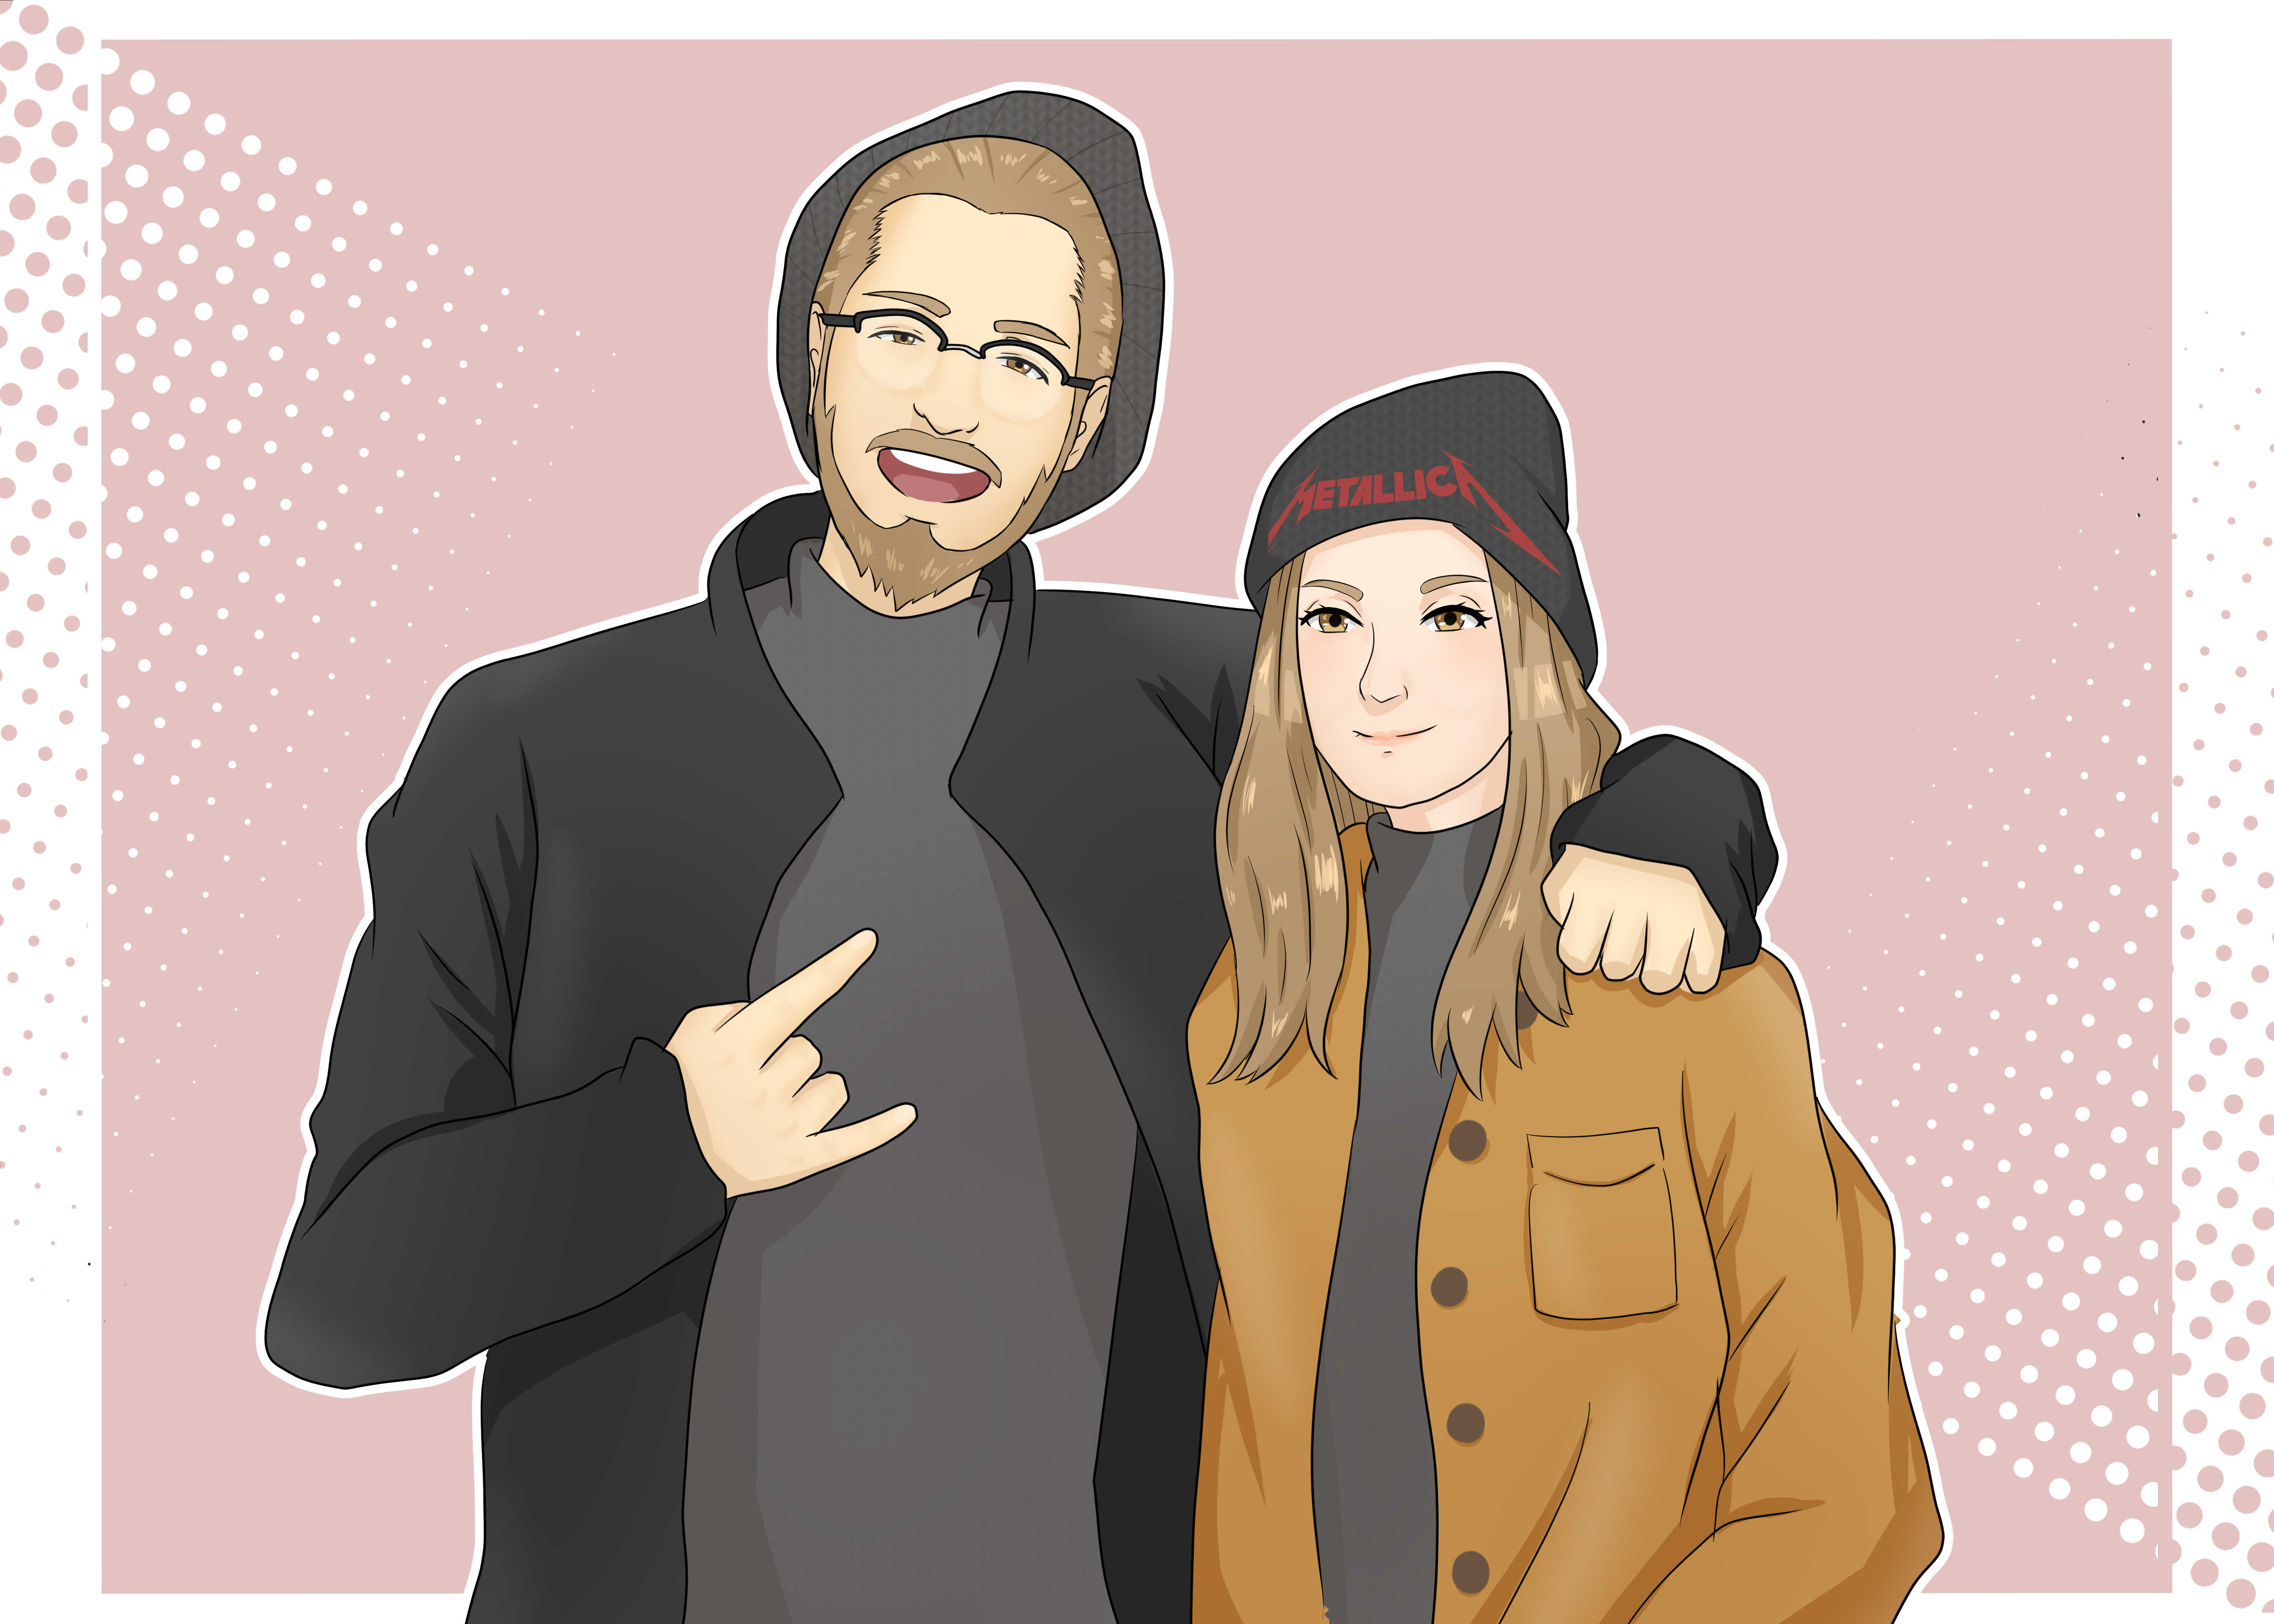 Do couple drawing in anime cartoon style by Rinaldo_art29 | Fiverr